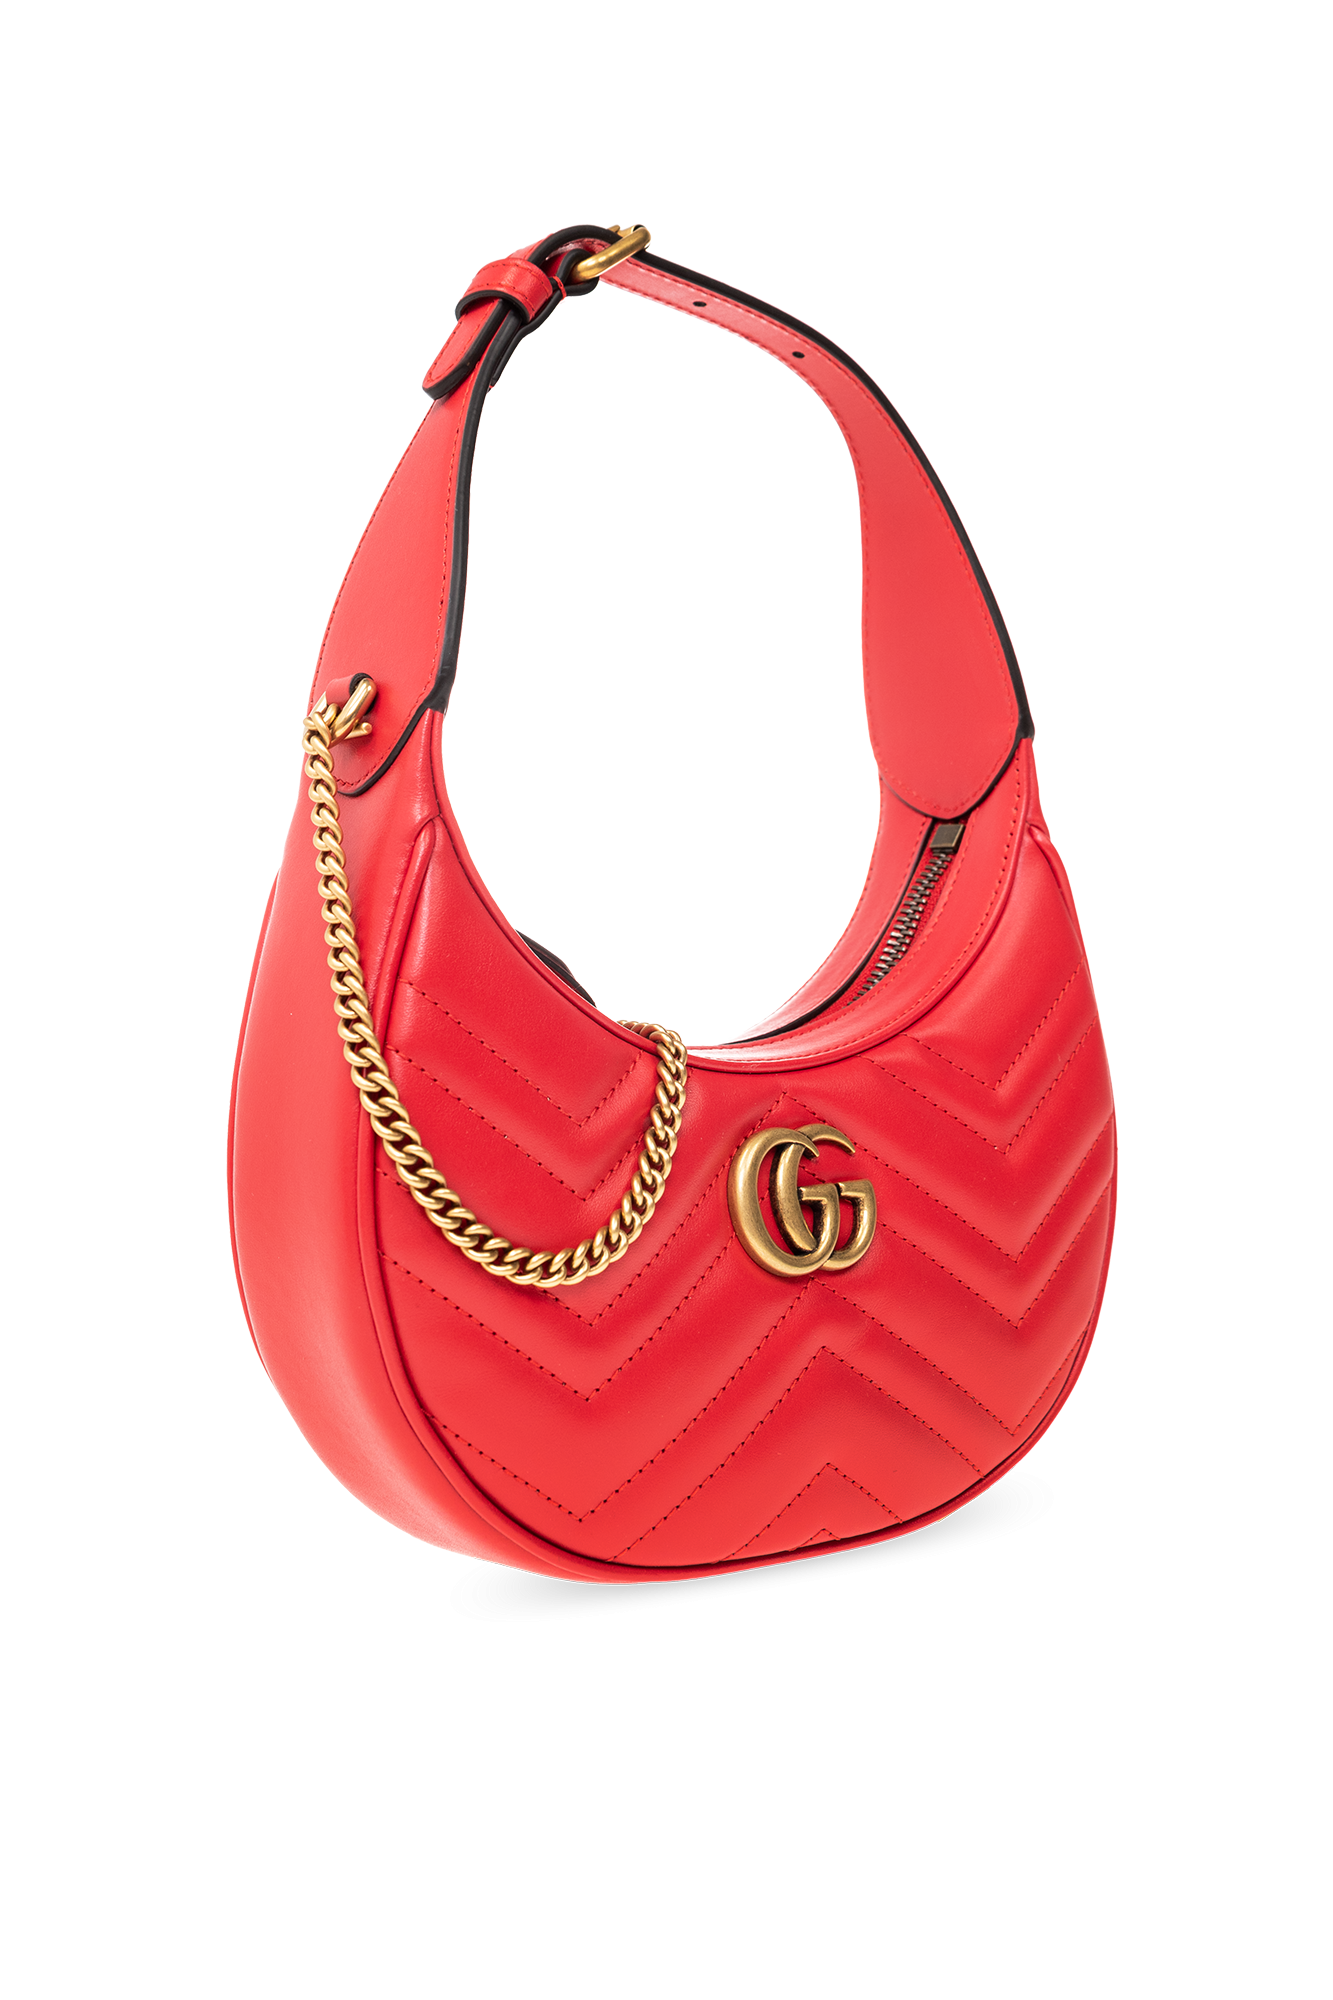 Gucci India  Buy New  Preowned Gucci Handbags Shoes Accessories   Clothing for Men and Women